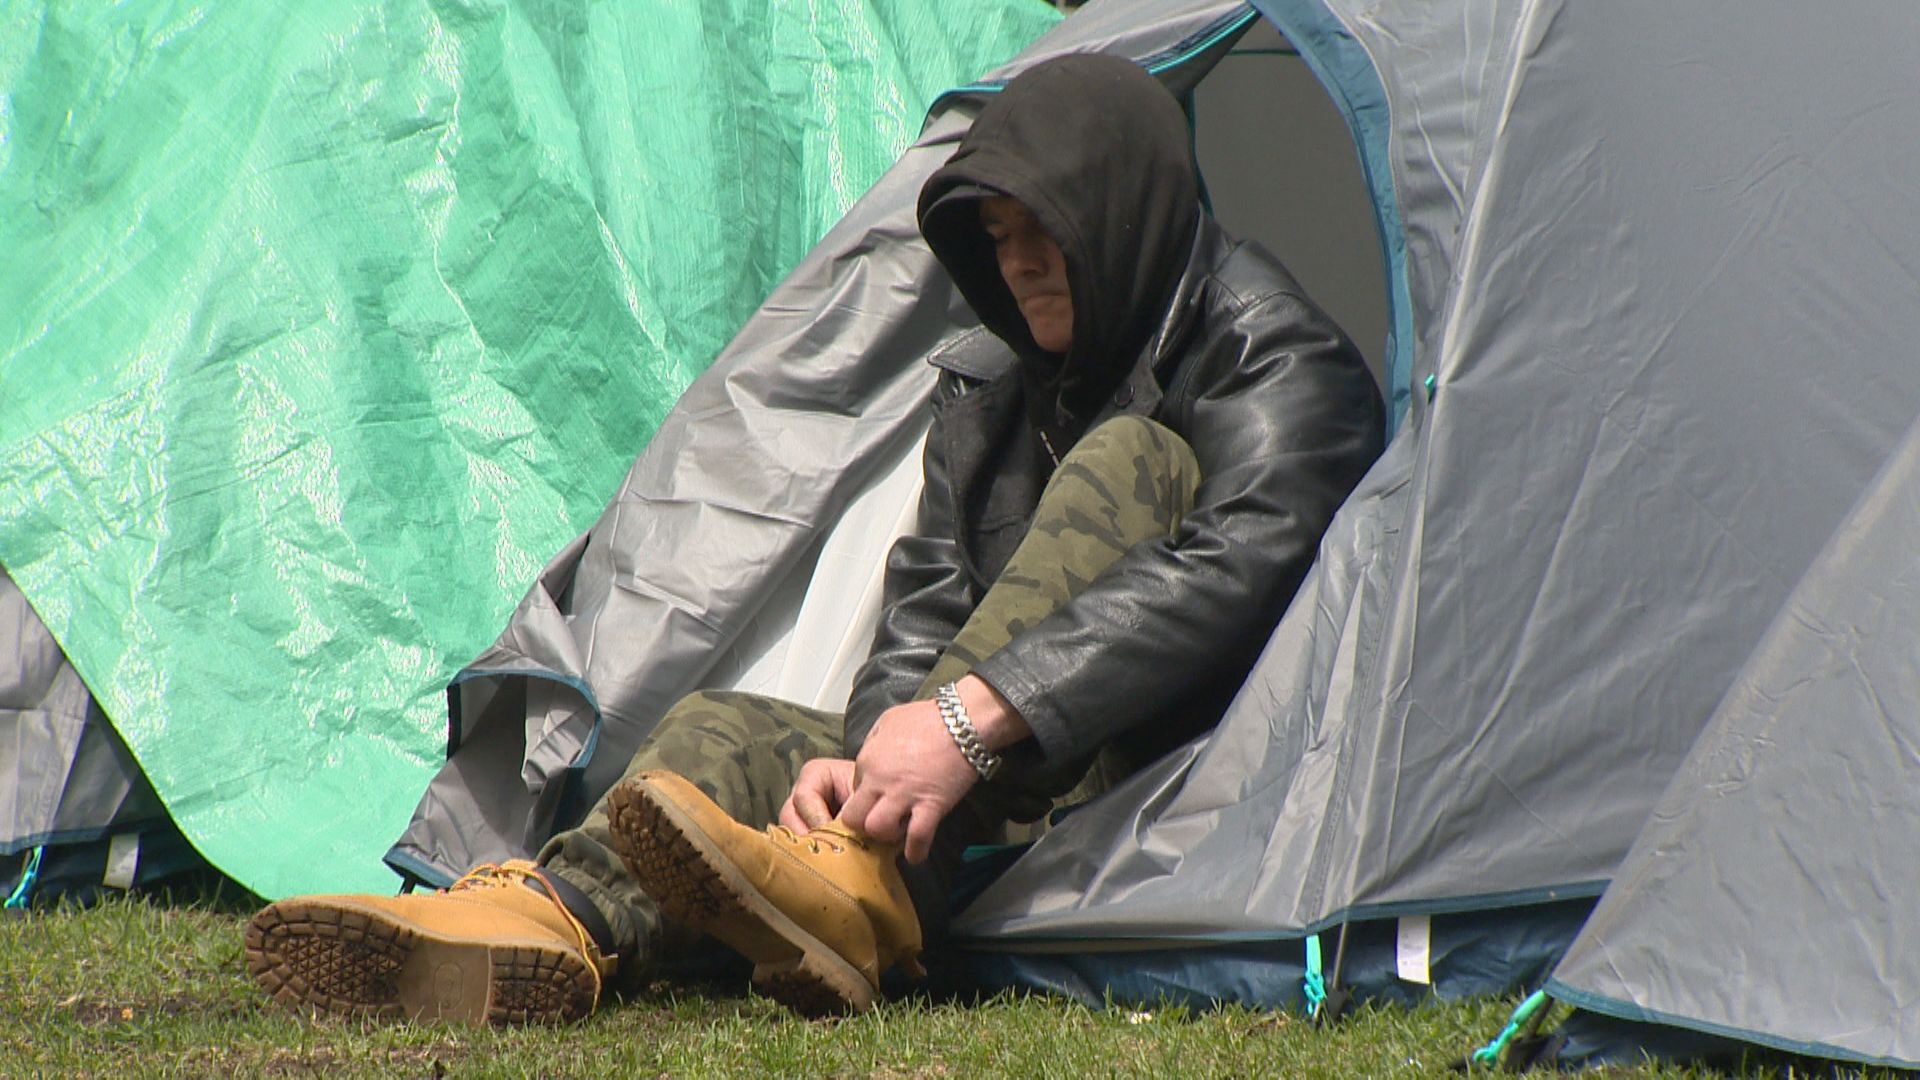 Prevention programs key to tackling homelessness in Montreal, advocates say